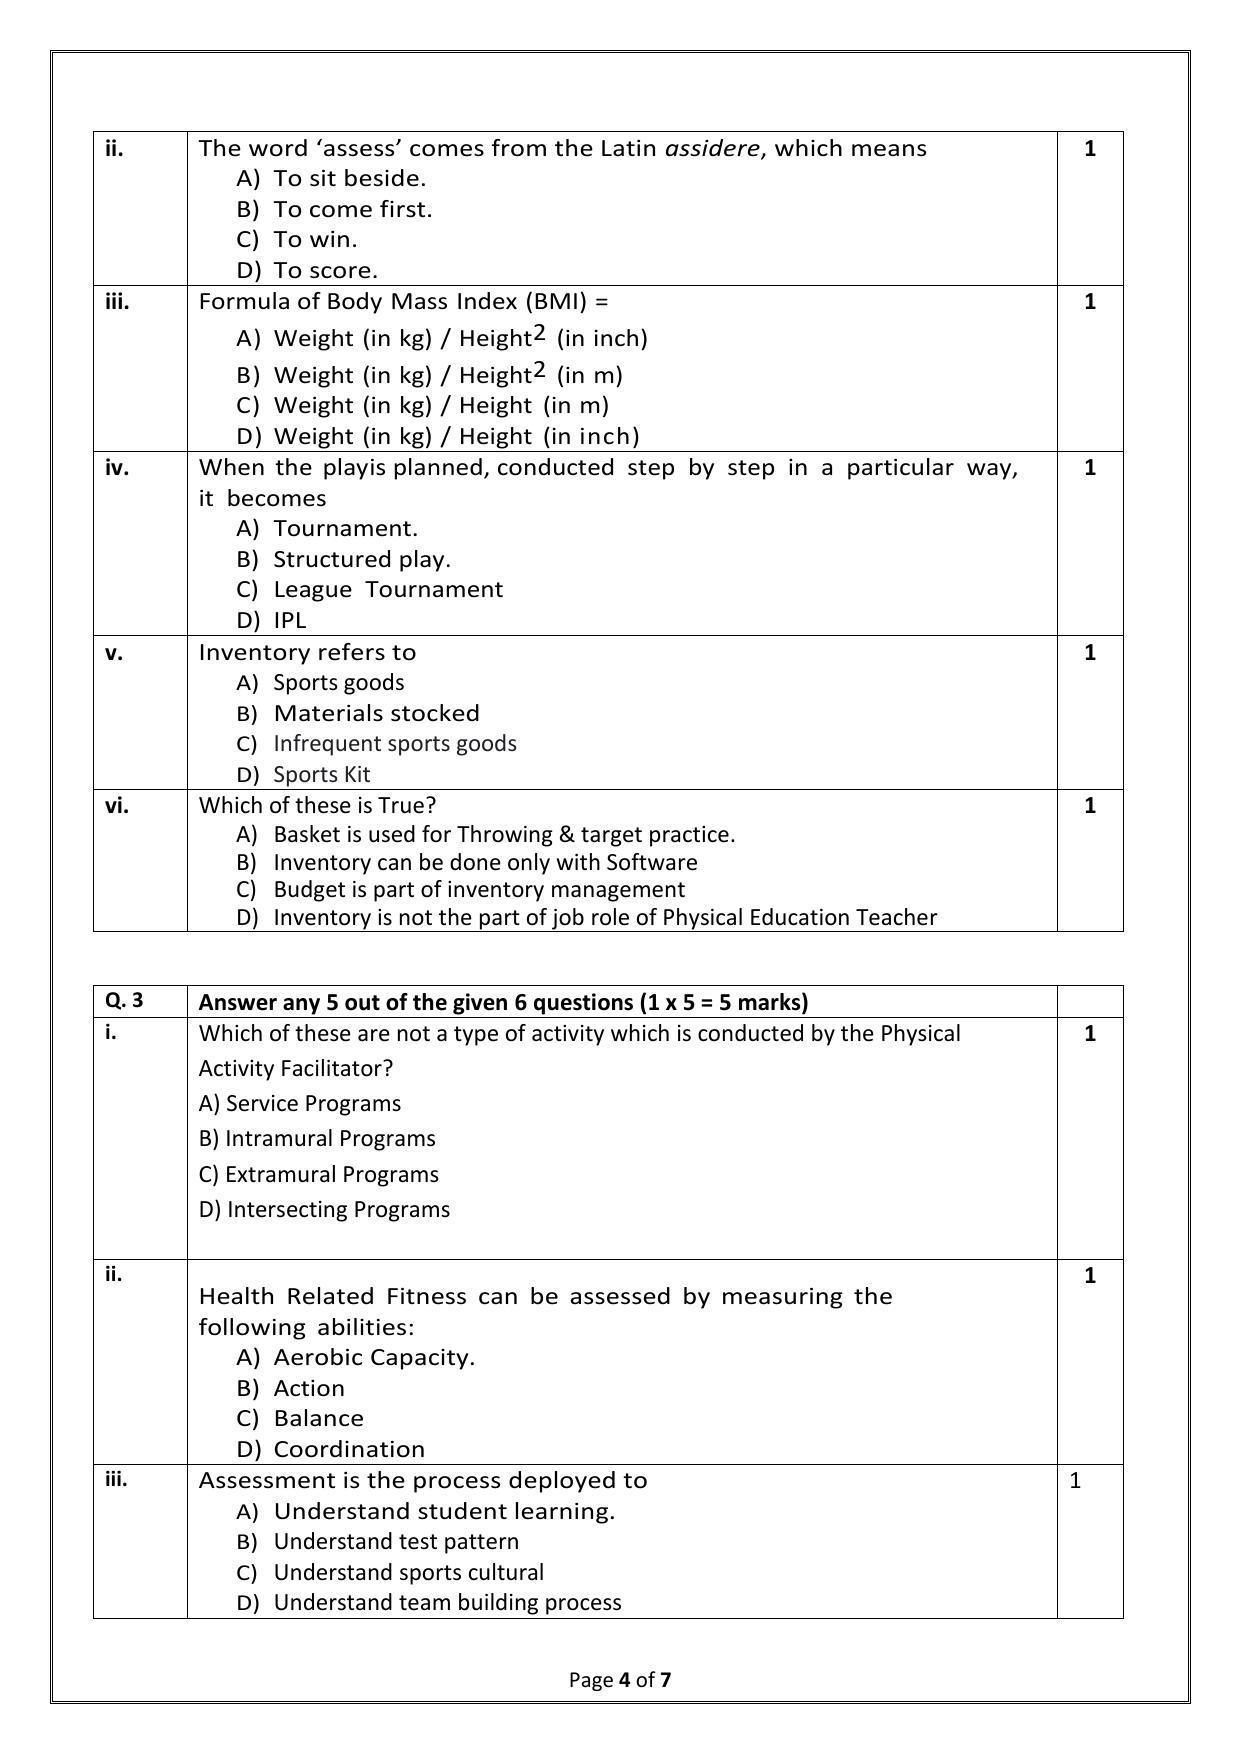 CBSE Class 10 (Skill Education) Physical Activity Trainer Sample Papers 2023 - Page 4